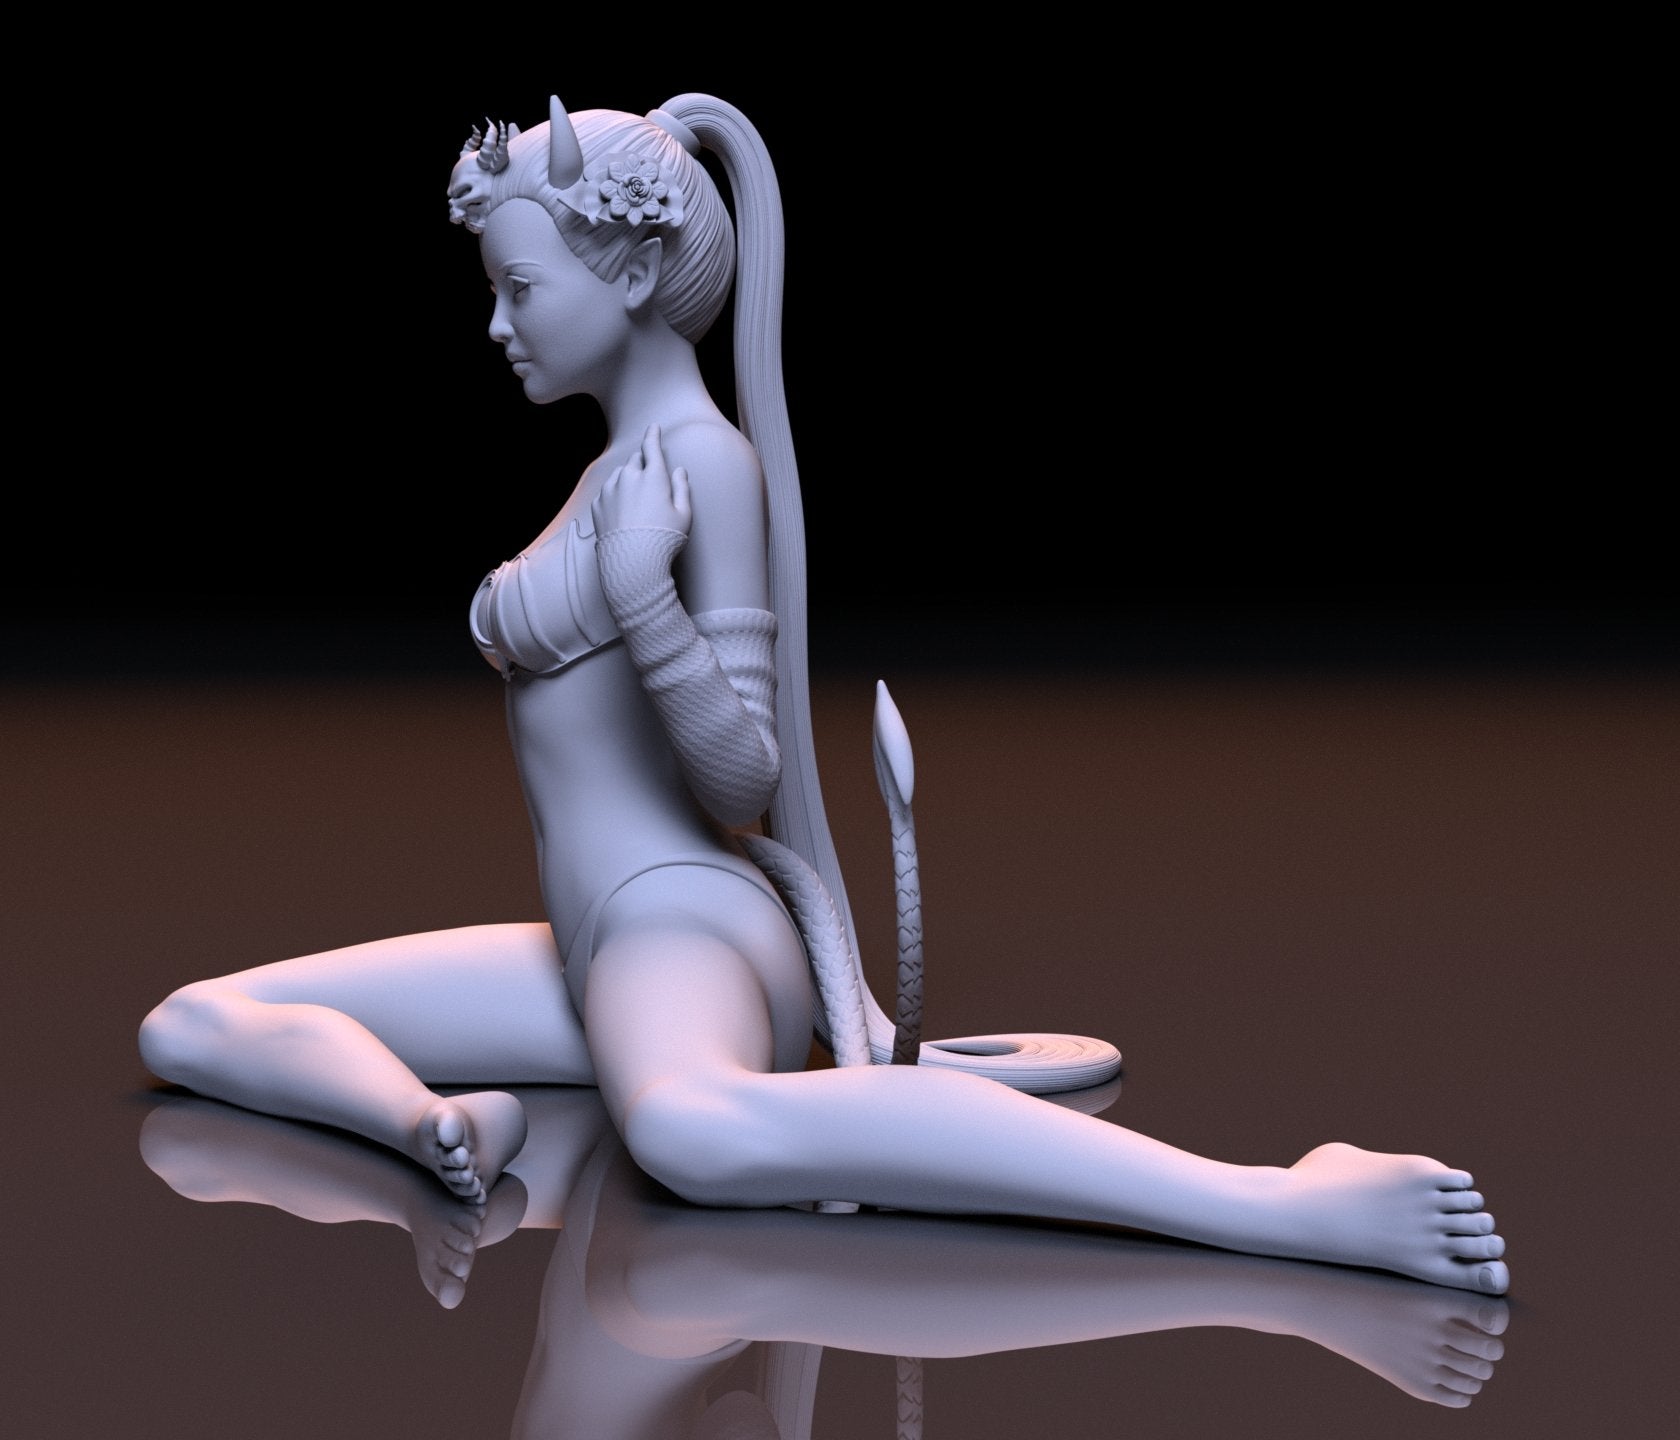 SUCCUBUS 3D Printed Figurine Fanart Unpainted Scaled Models Collectibles